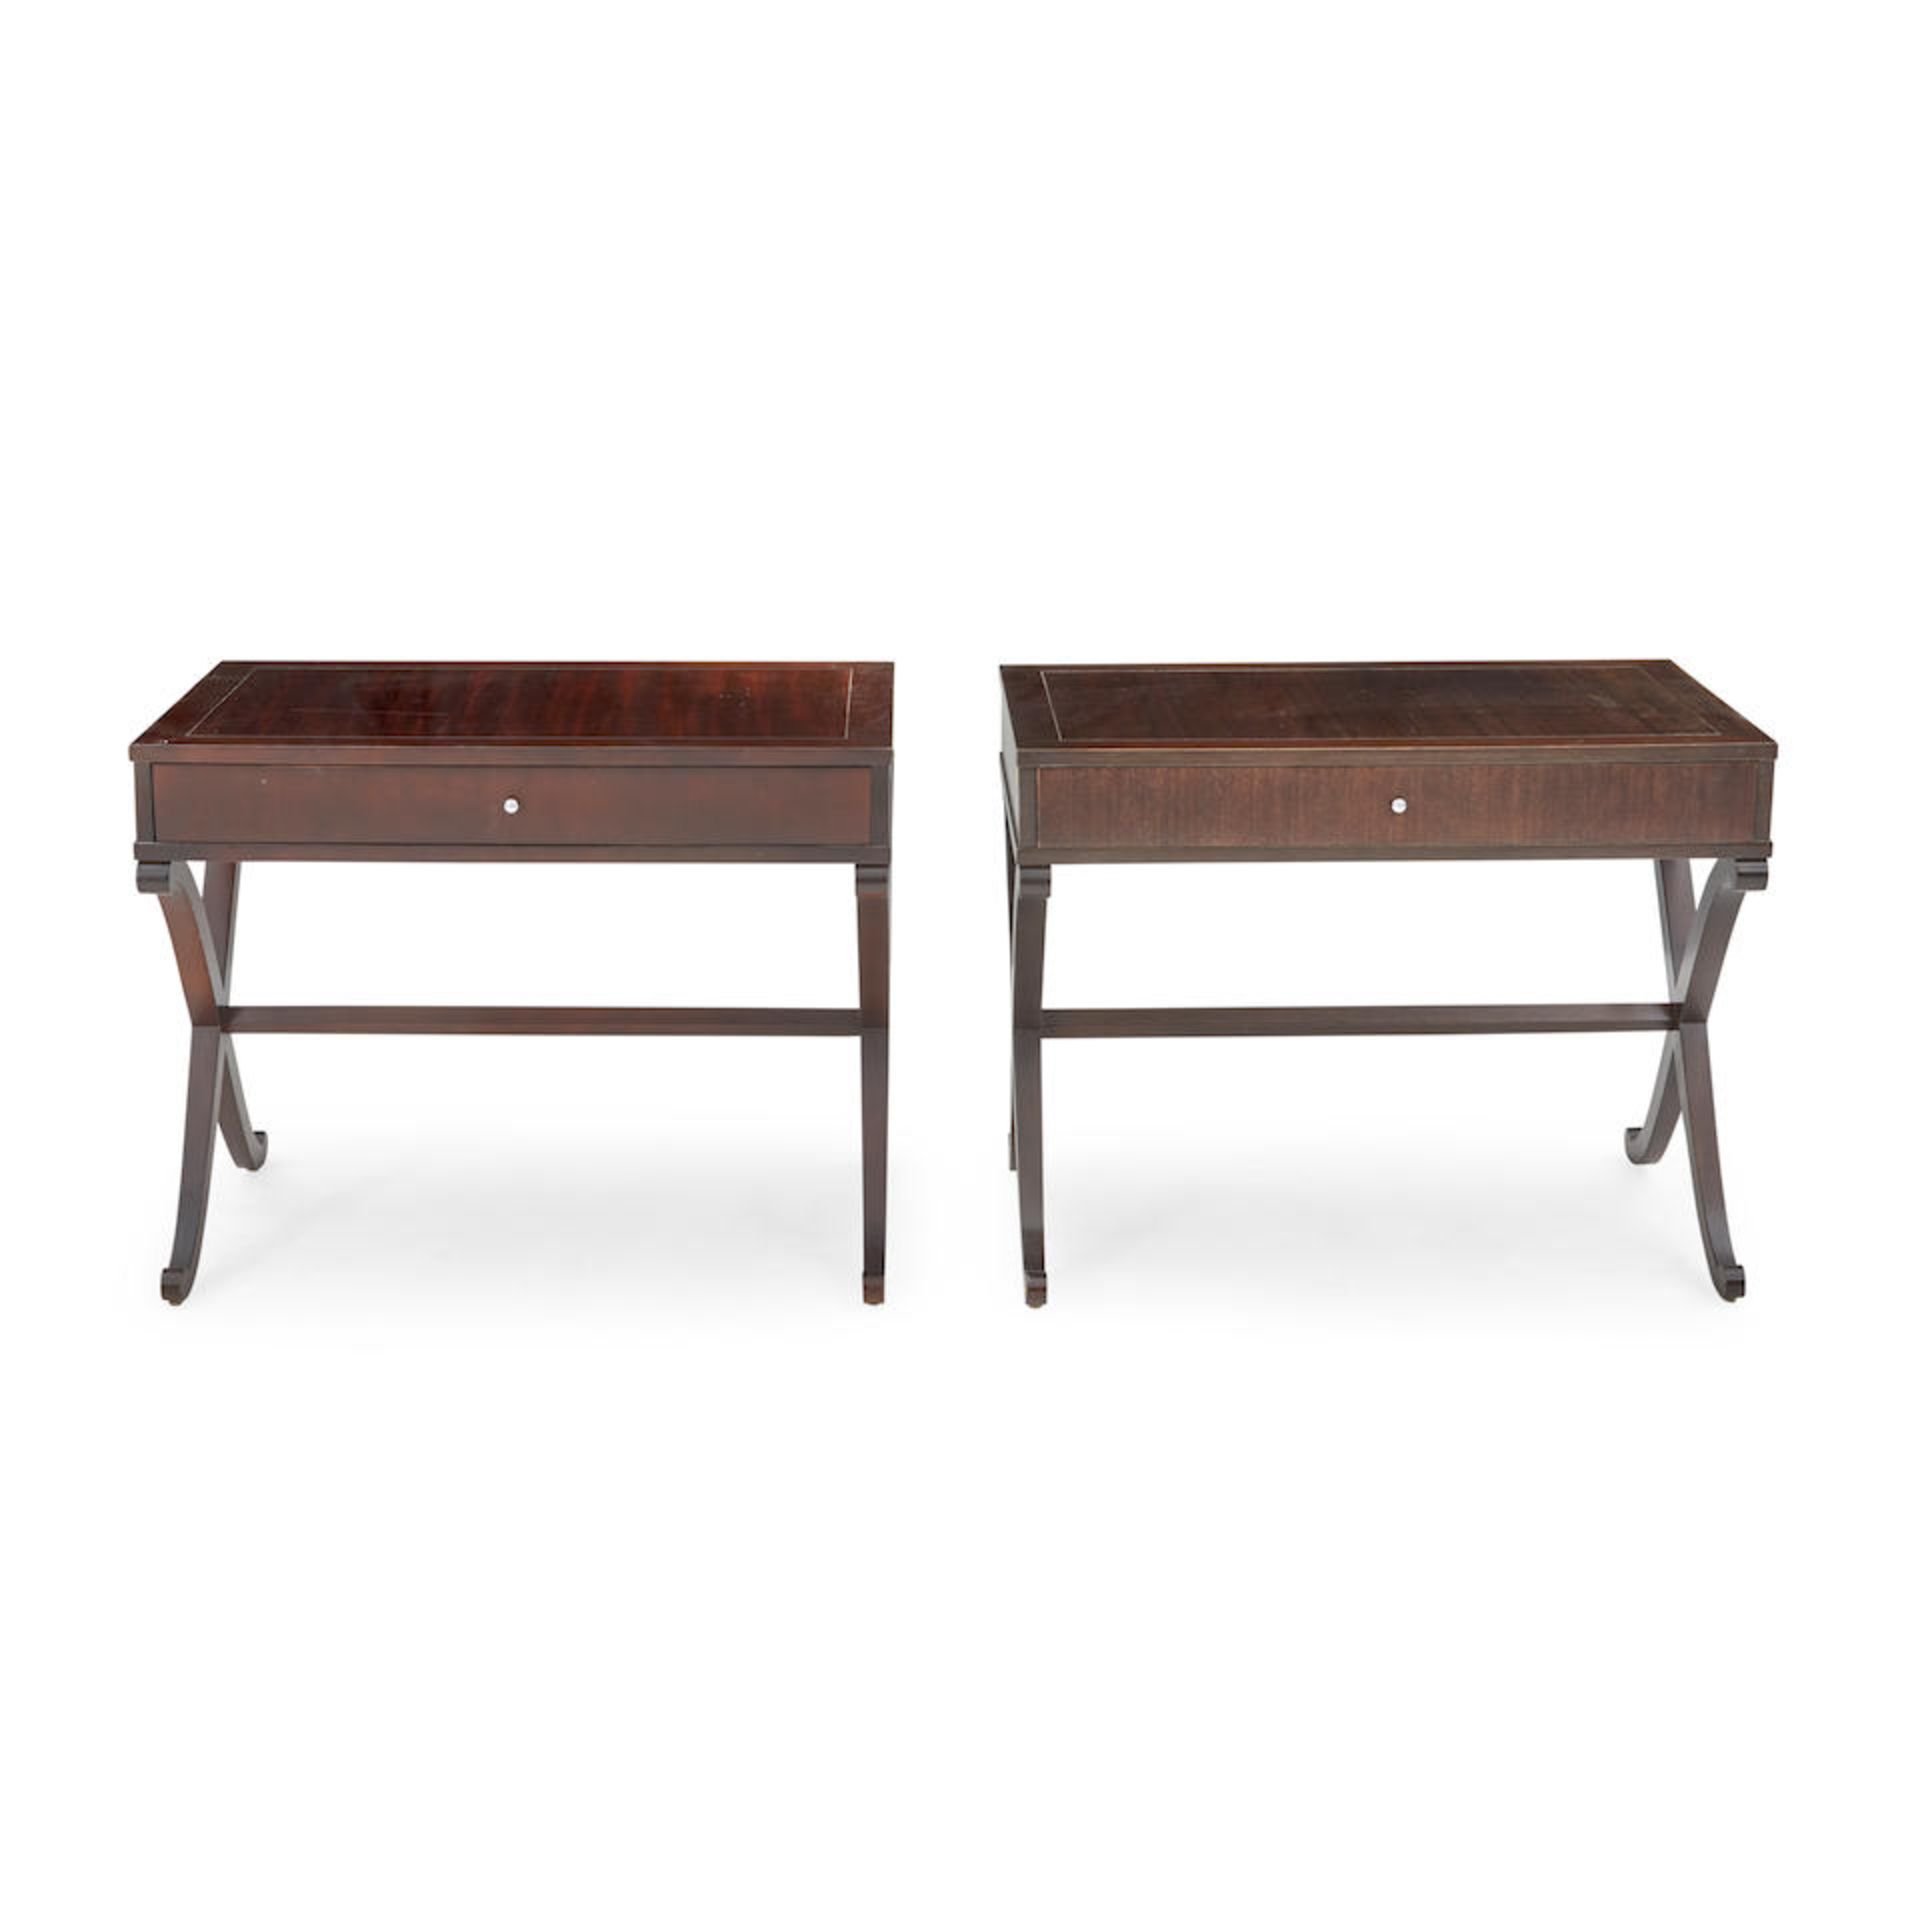 PAIR OF CONTEMPORARY BAKER FURNITURE WALNUT CROSS STRETCHER TABLES